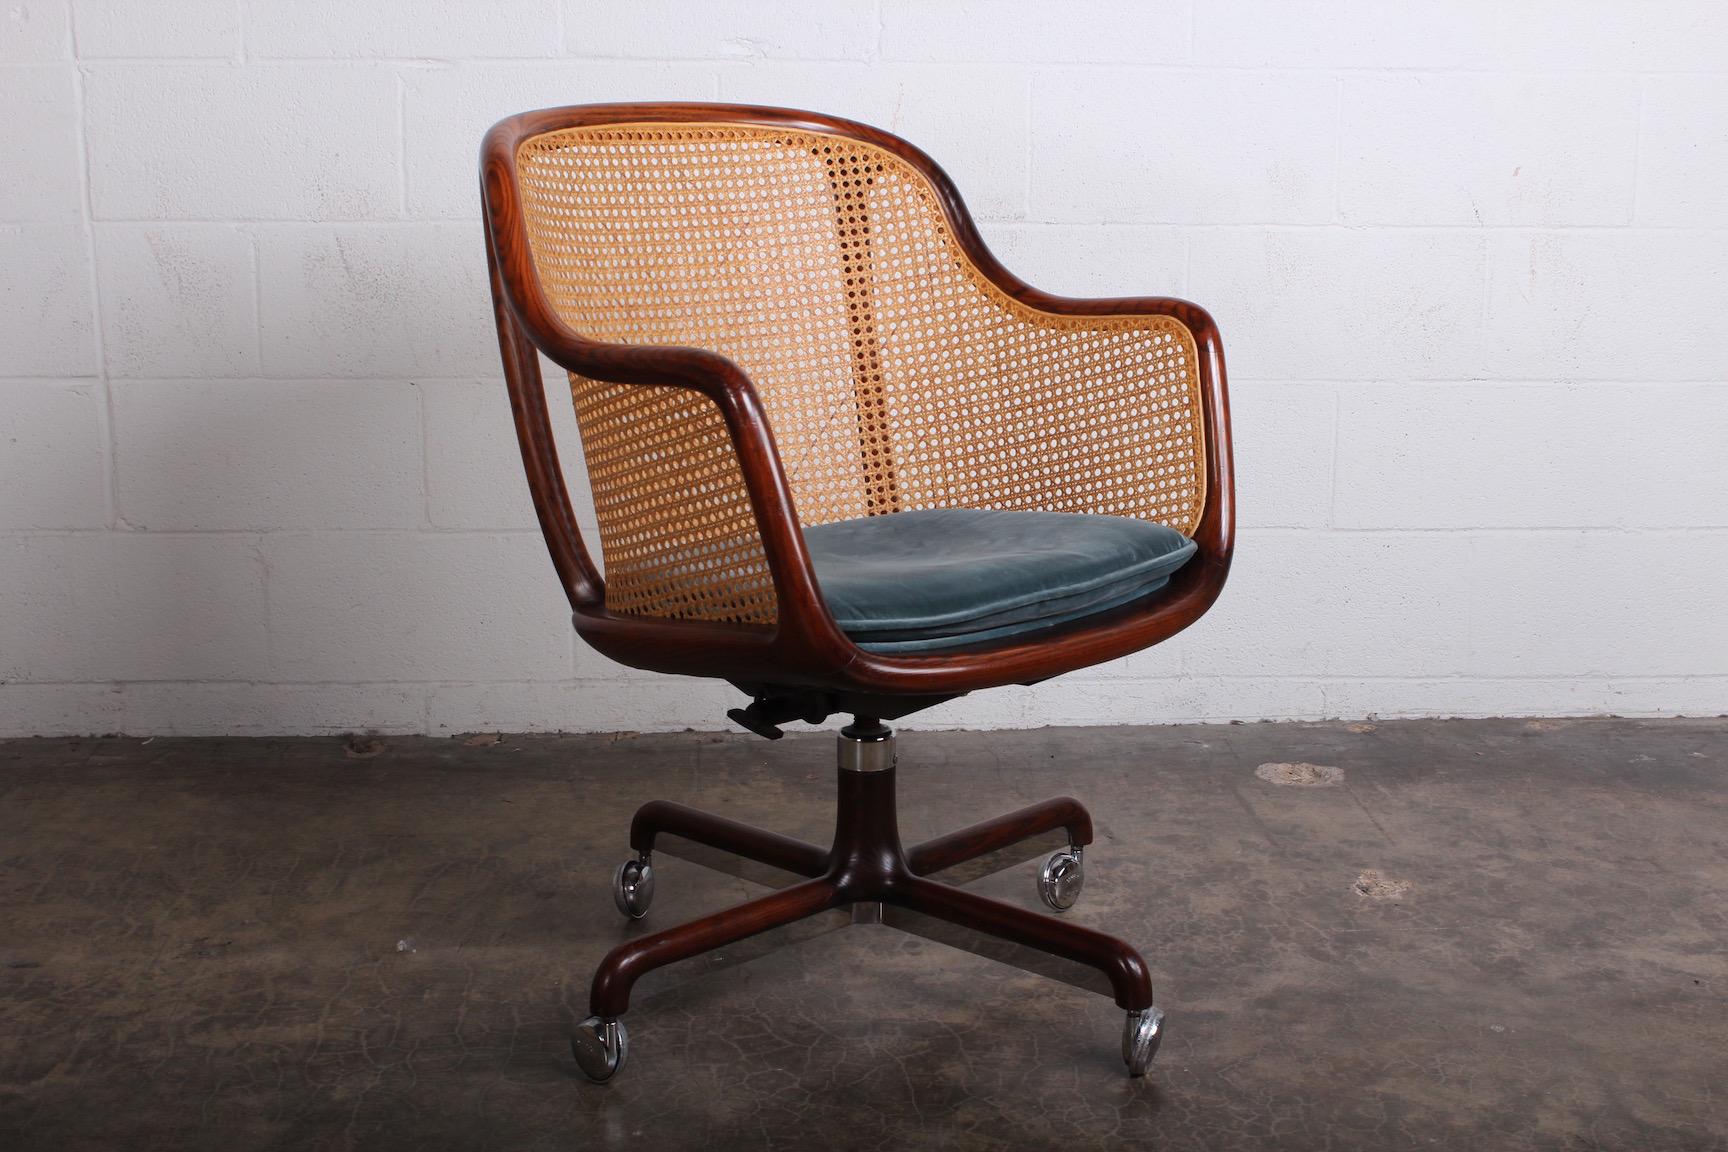 A fully caned desk chair with ash frame and original velvet seat. Designed by Ward Bennett for Brickel.
Height is adjustable.